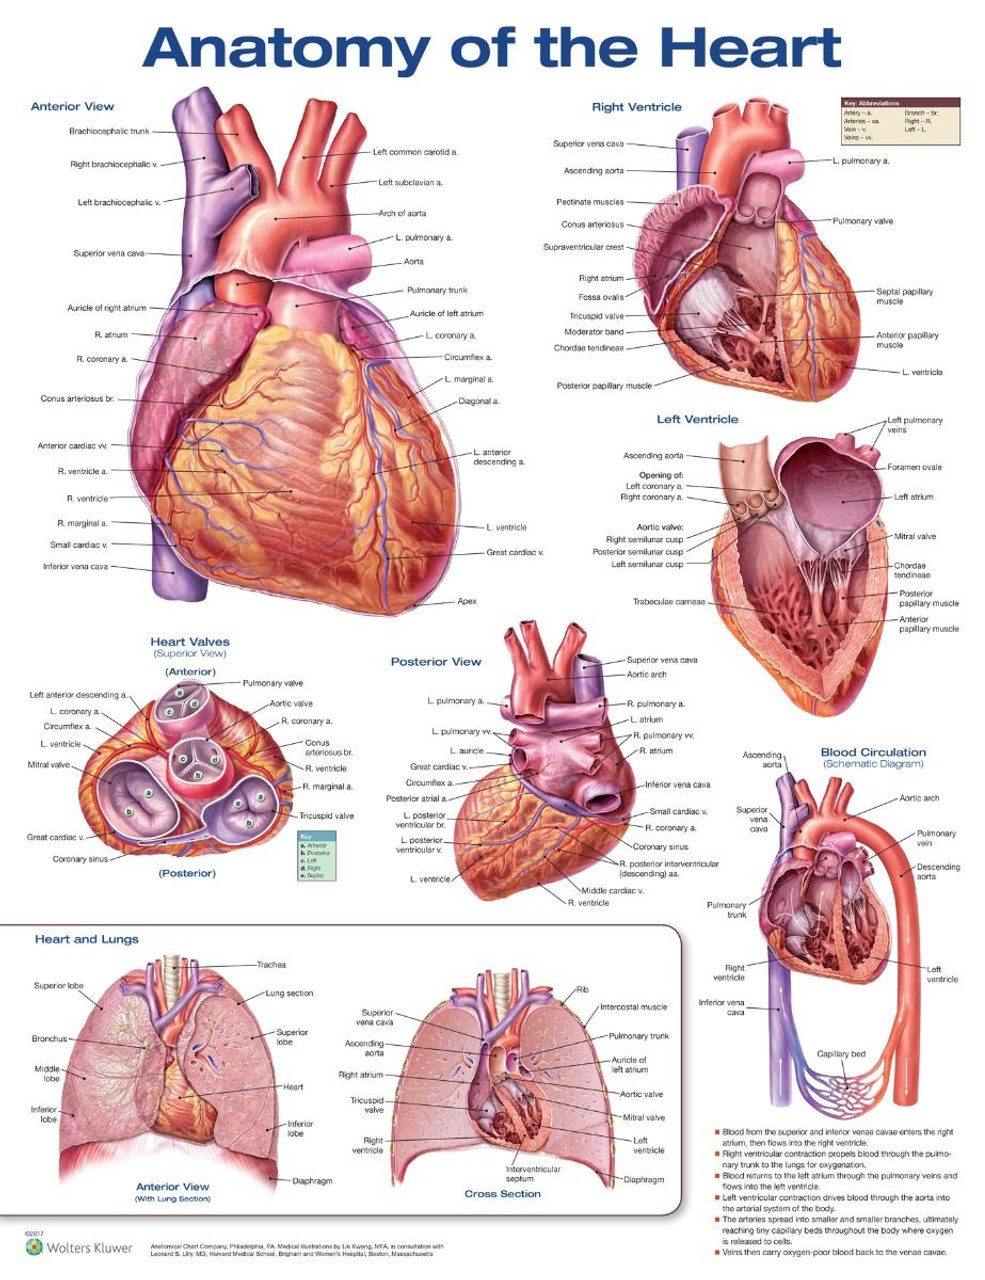 Anatomy Of The Heart 3rd Ed Clinical Charts And Supplies